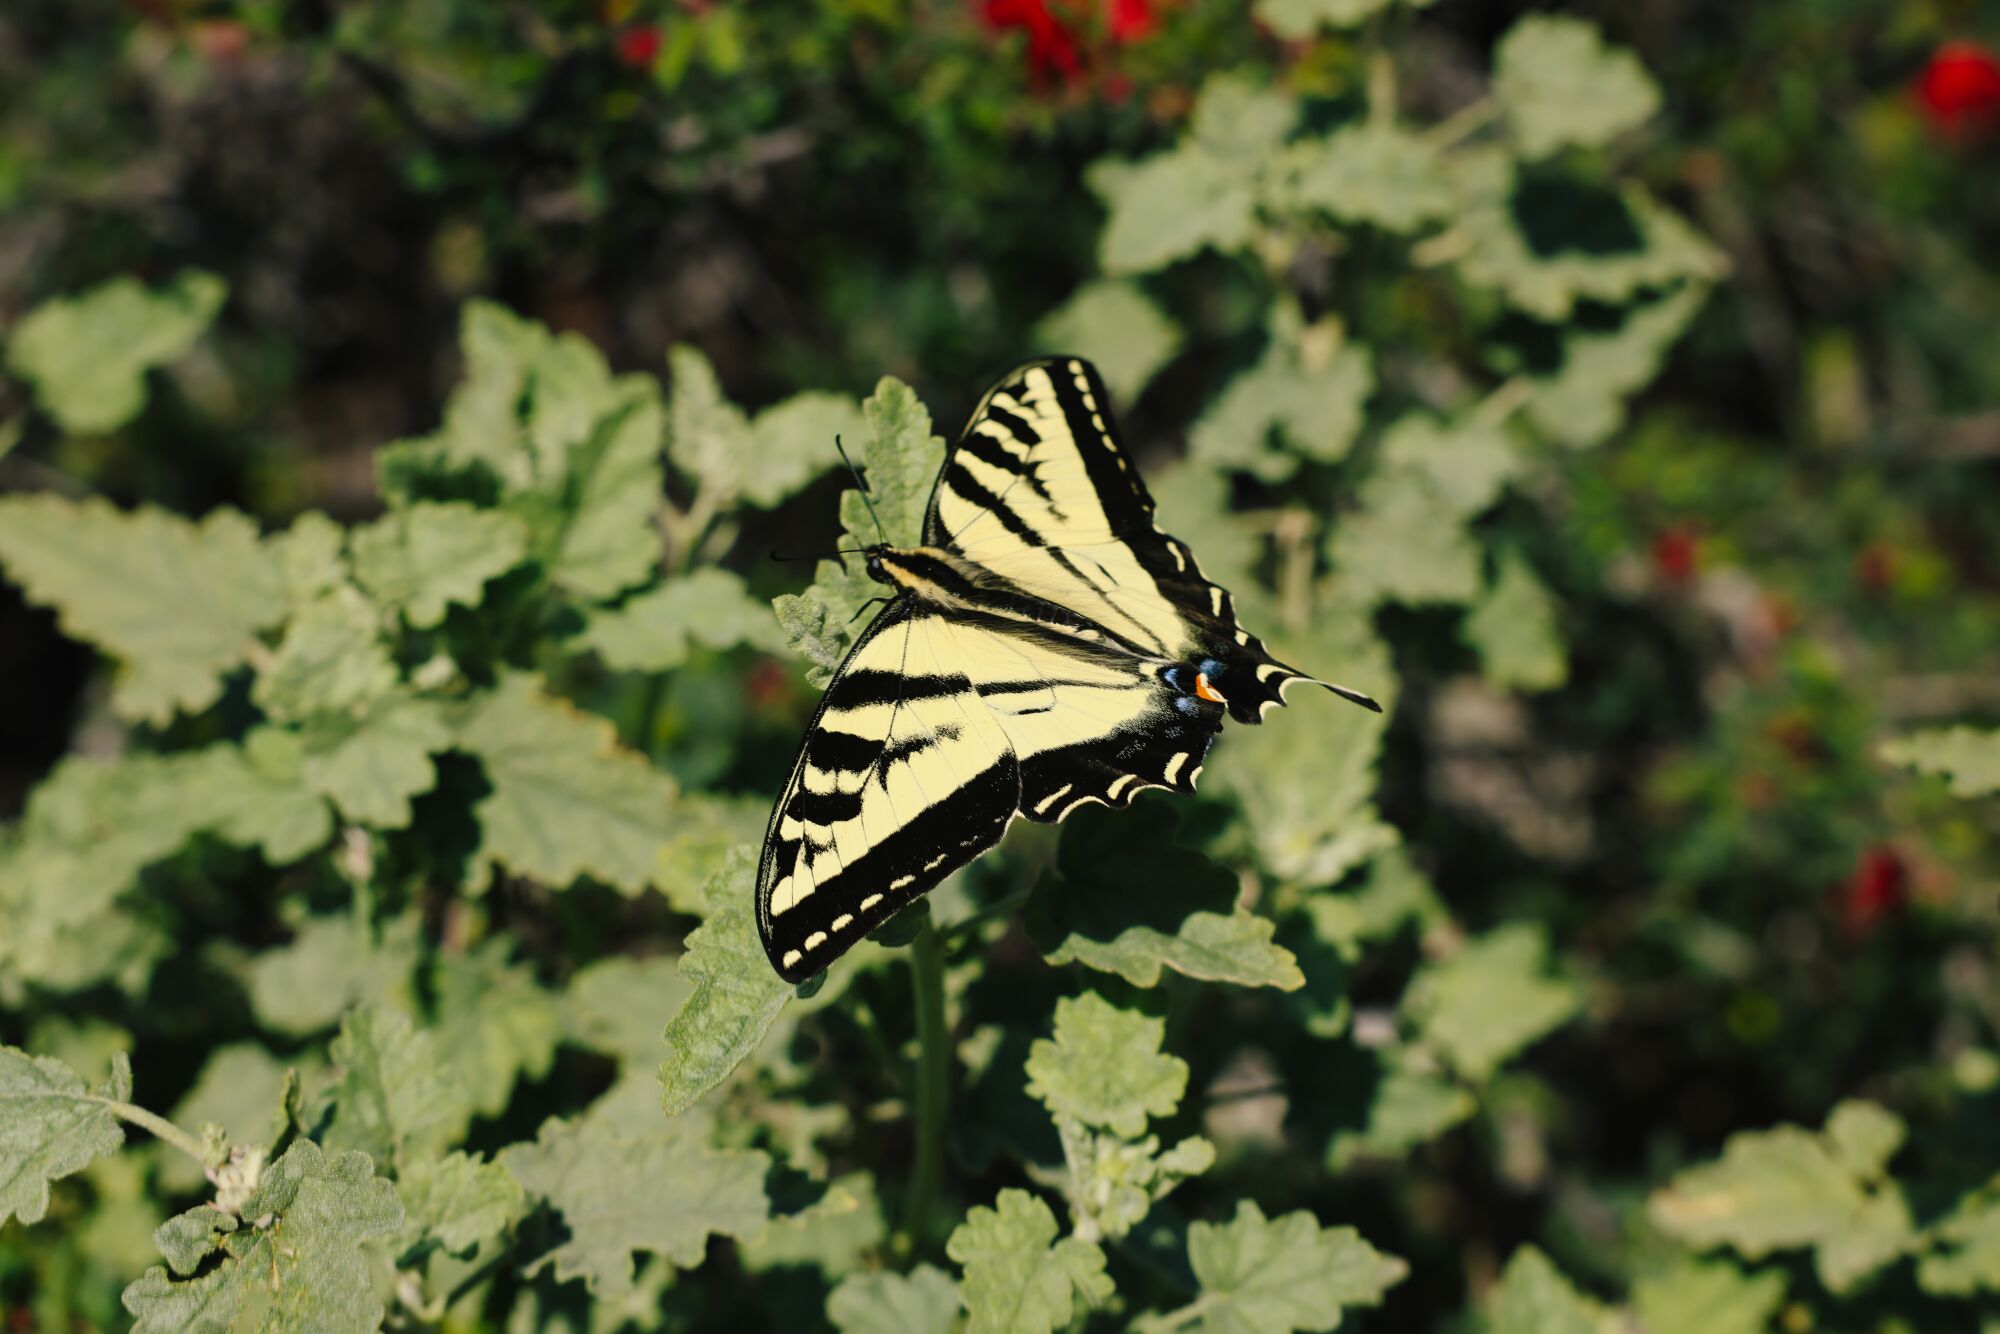 A yellow and black butterfly against a leafy green background